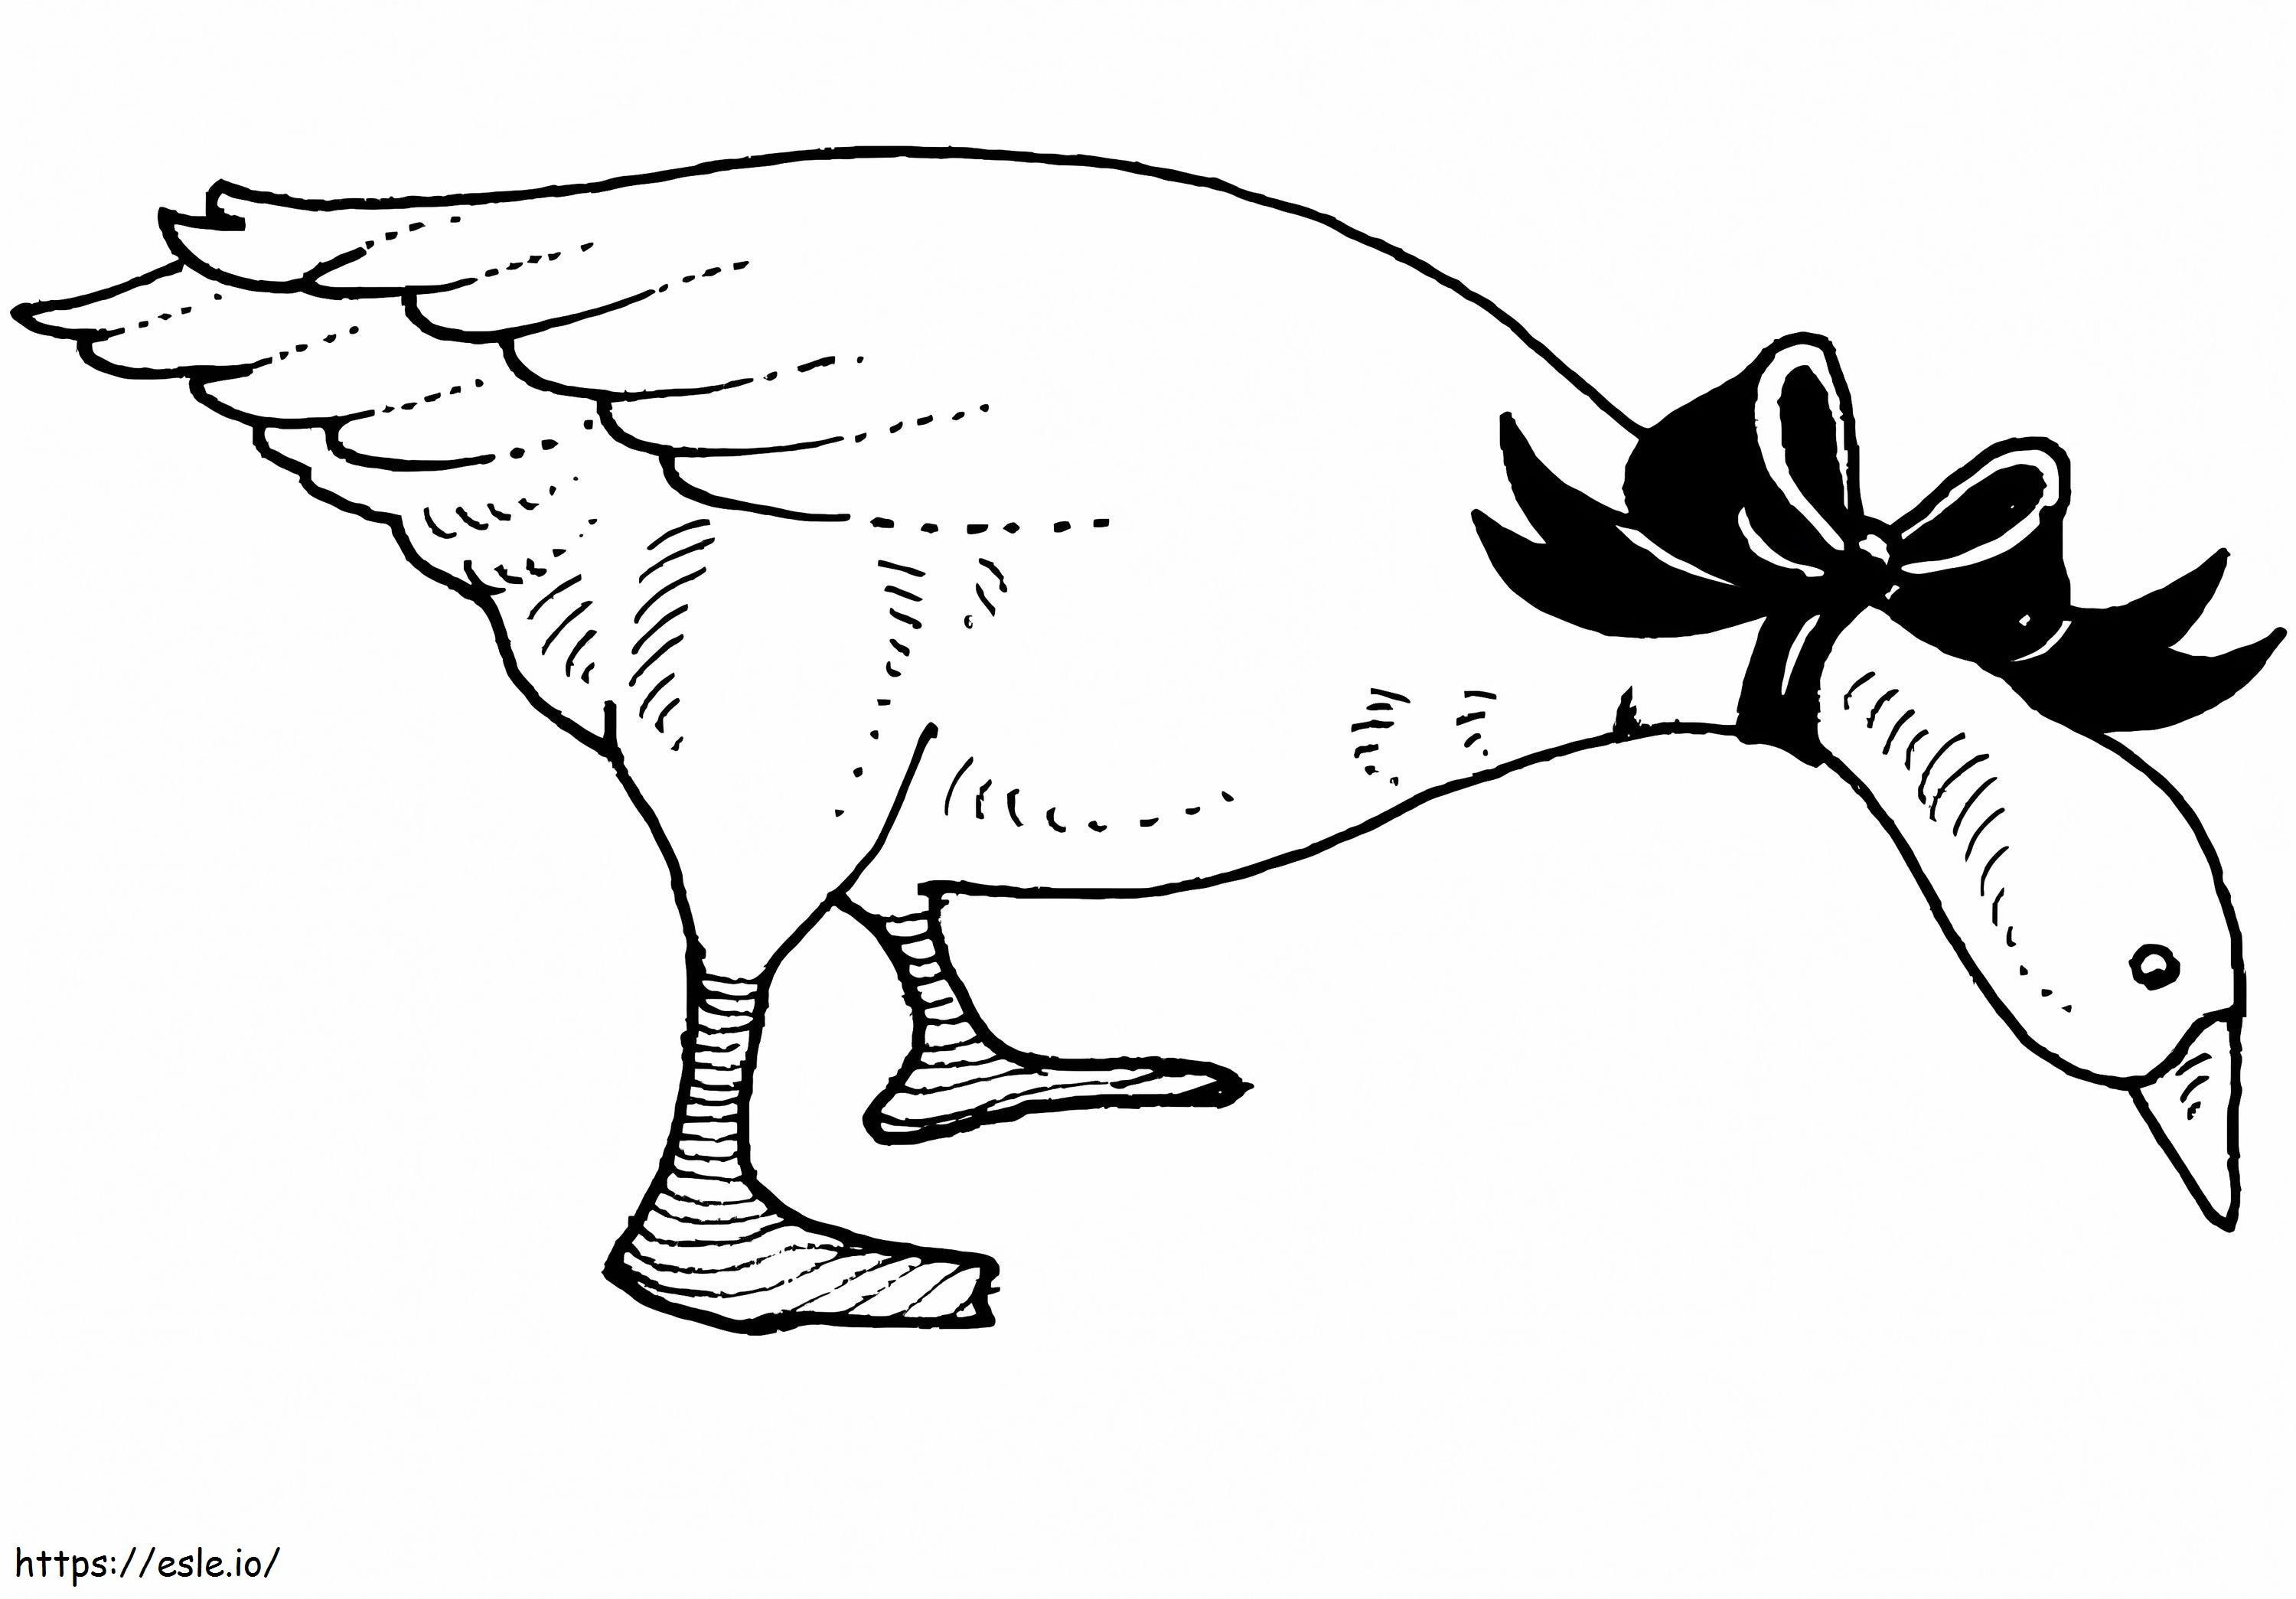 Goose 3 coloring page